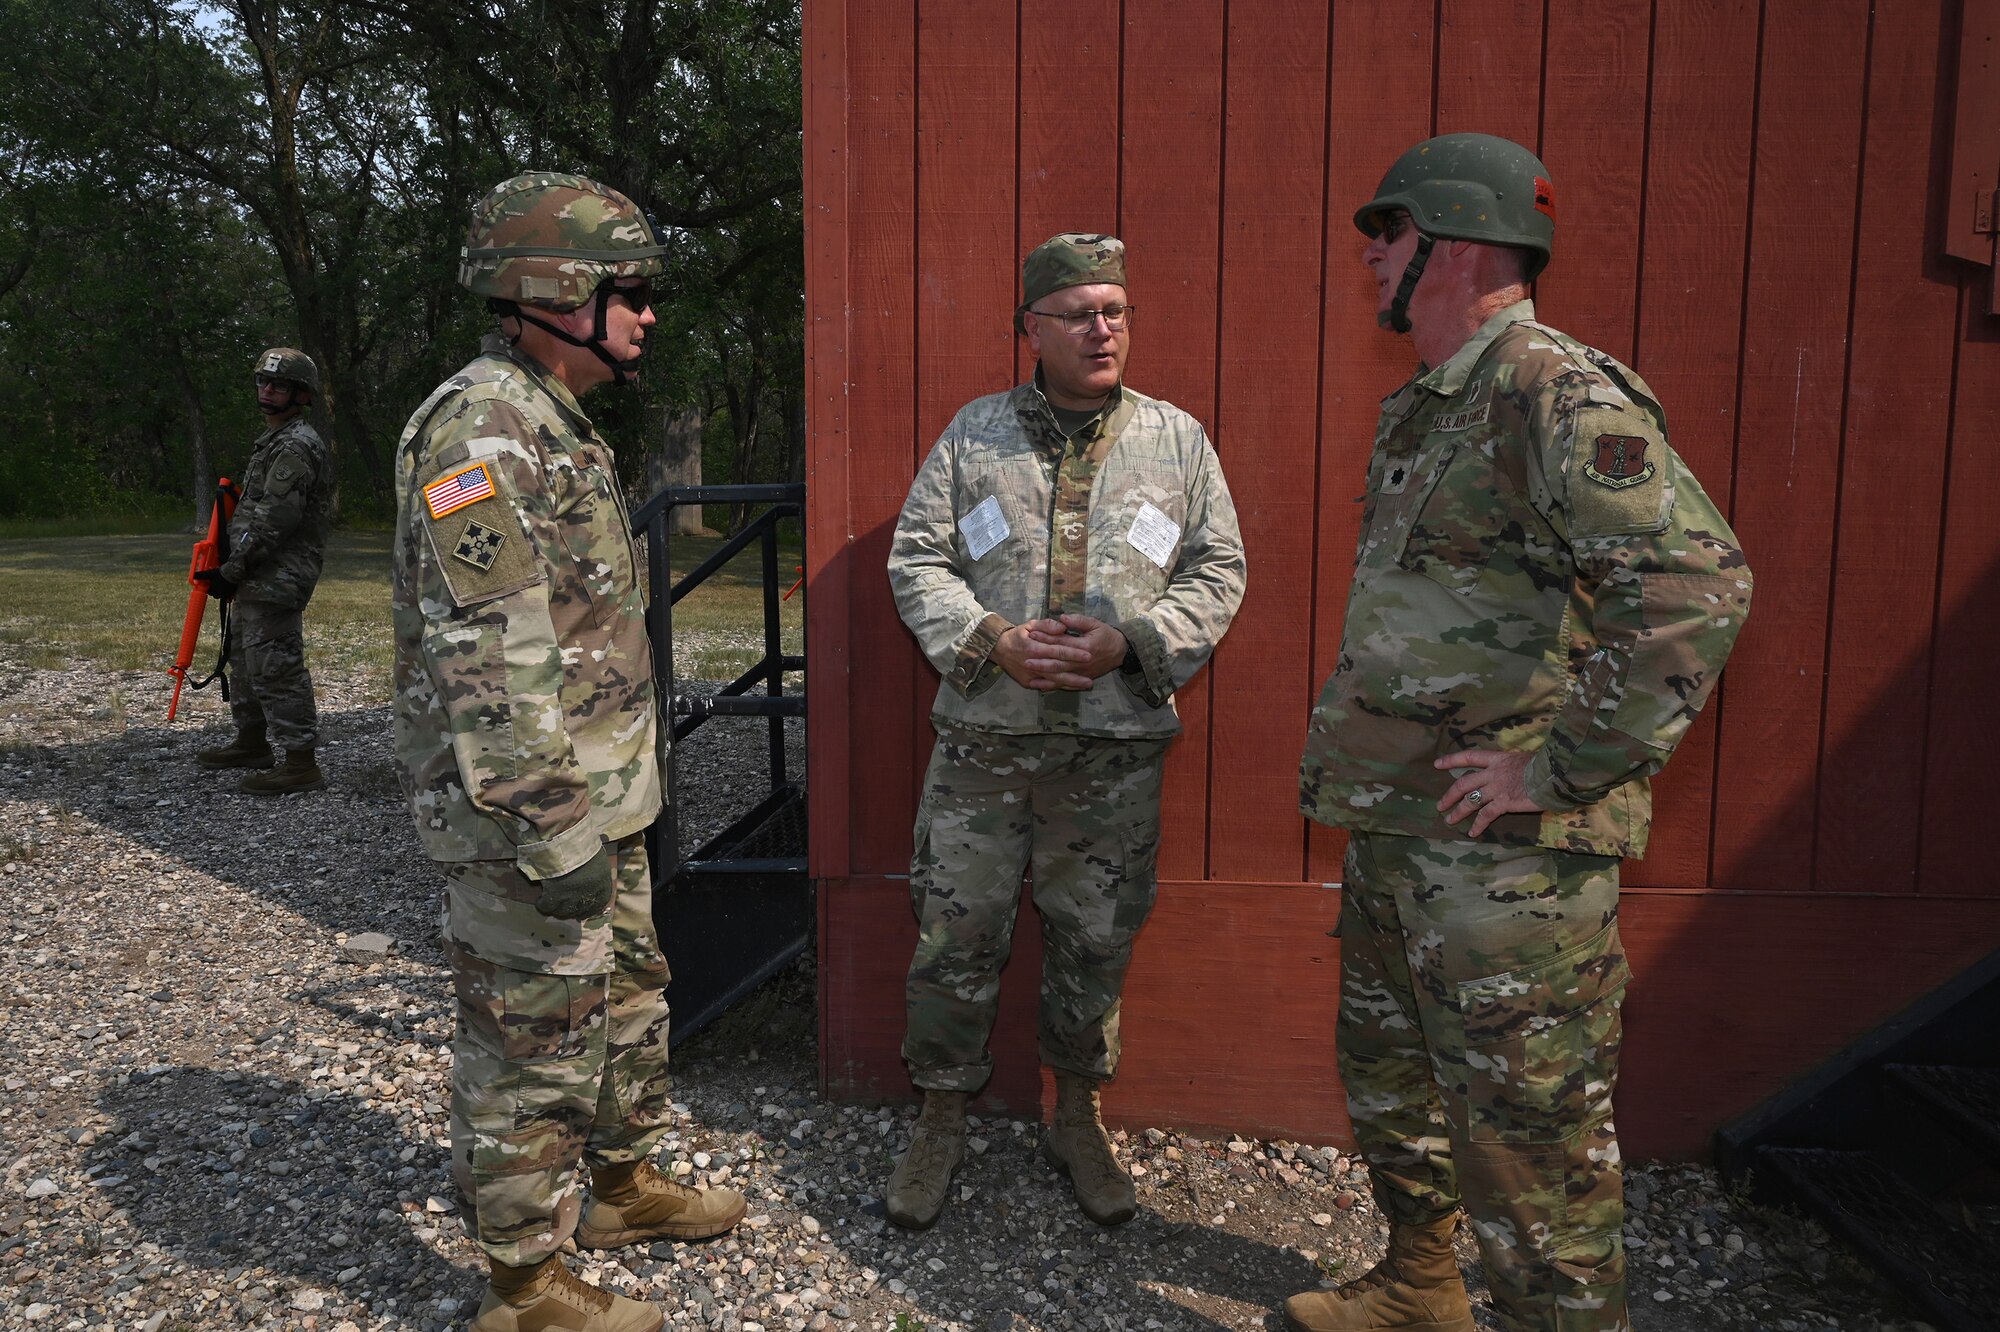 Three North Dakota National Guard chaplains in military uniform simulate discussions as if meeting in a foreign land during training at Camp Grafton Training Center, N.D., Aug. 3, 2021.